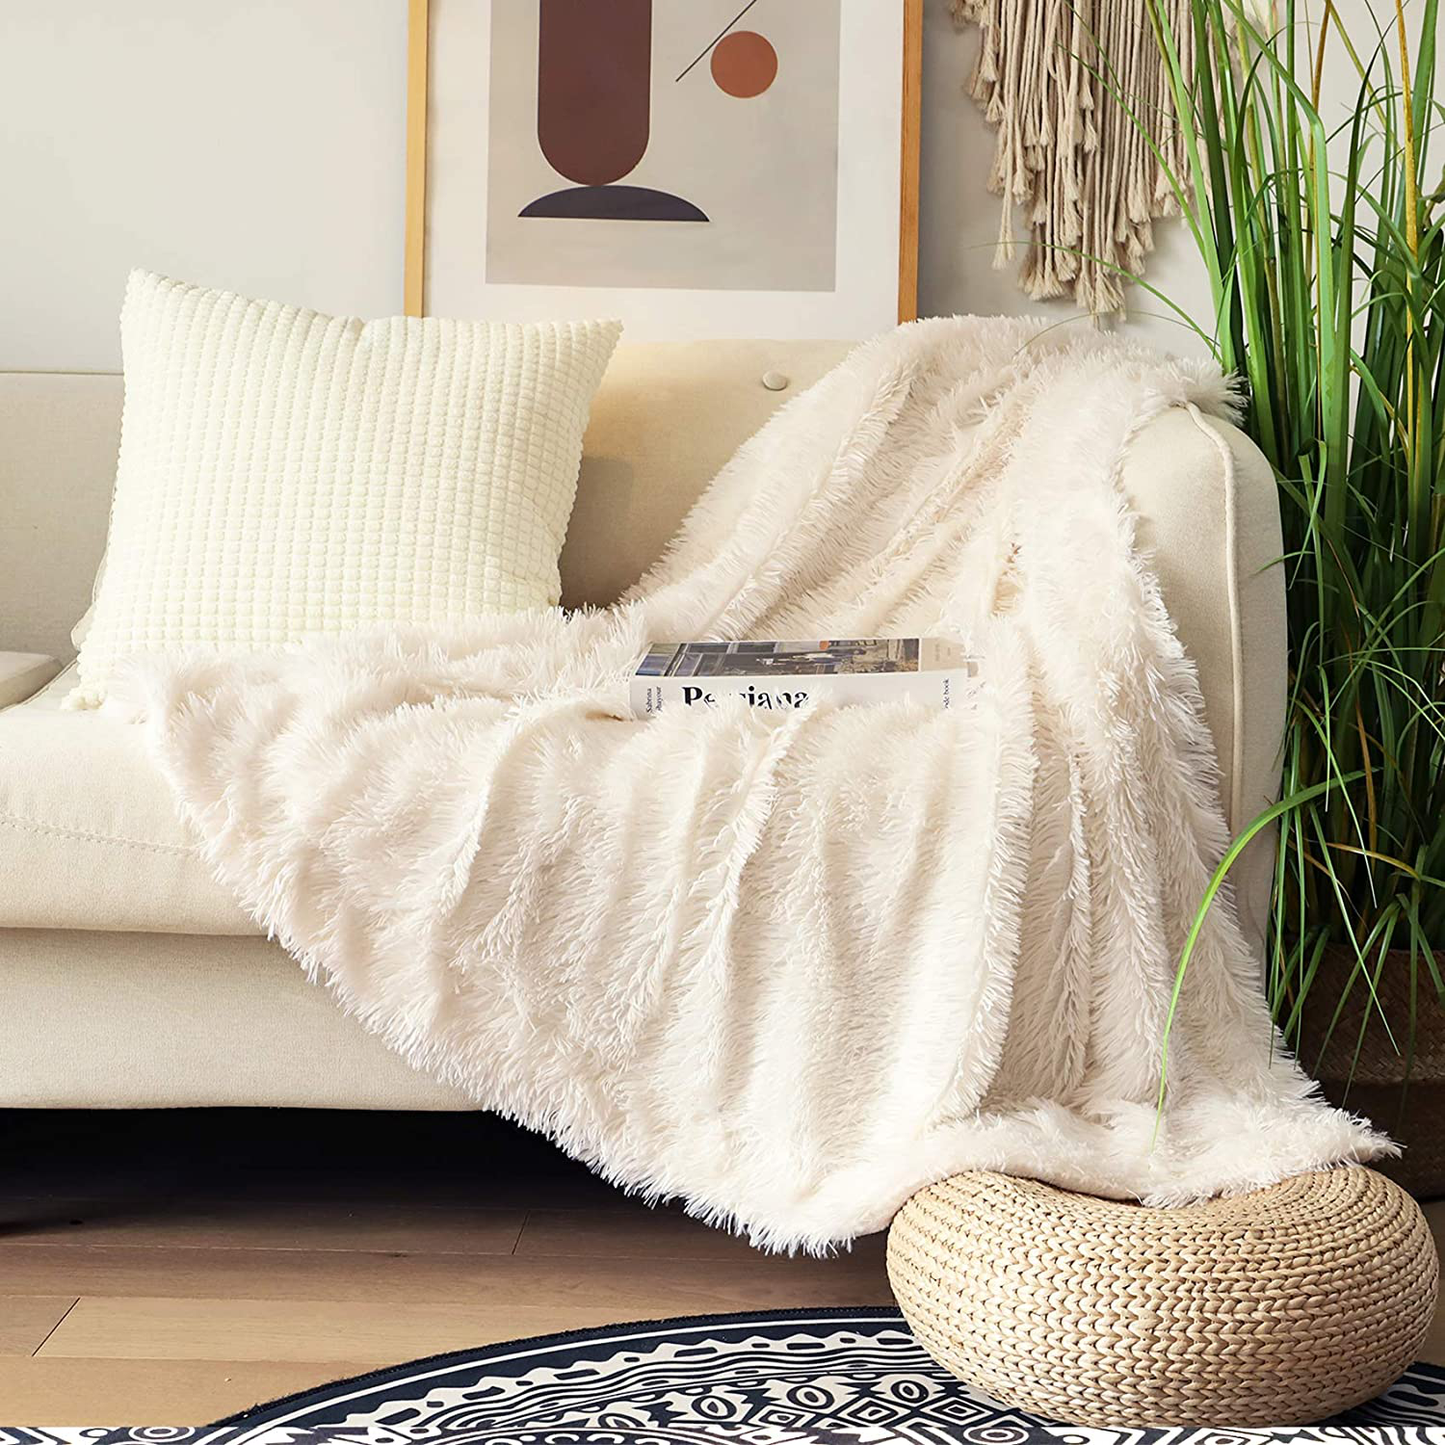 Decorative Extra Soft Faux Fur Throw Blanket 50" x 60",Solid Reversible Fuzzy Lightweight Long Hair Shaggy Blanket,Fluffy Cozy Plush Fleece Comfy Microfiber Fur Blanket for Couch Sofa Bed,Pure White